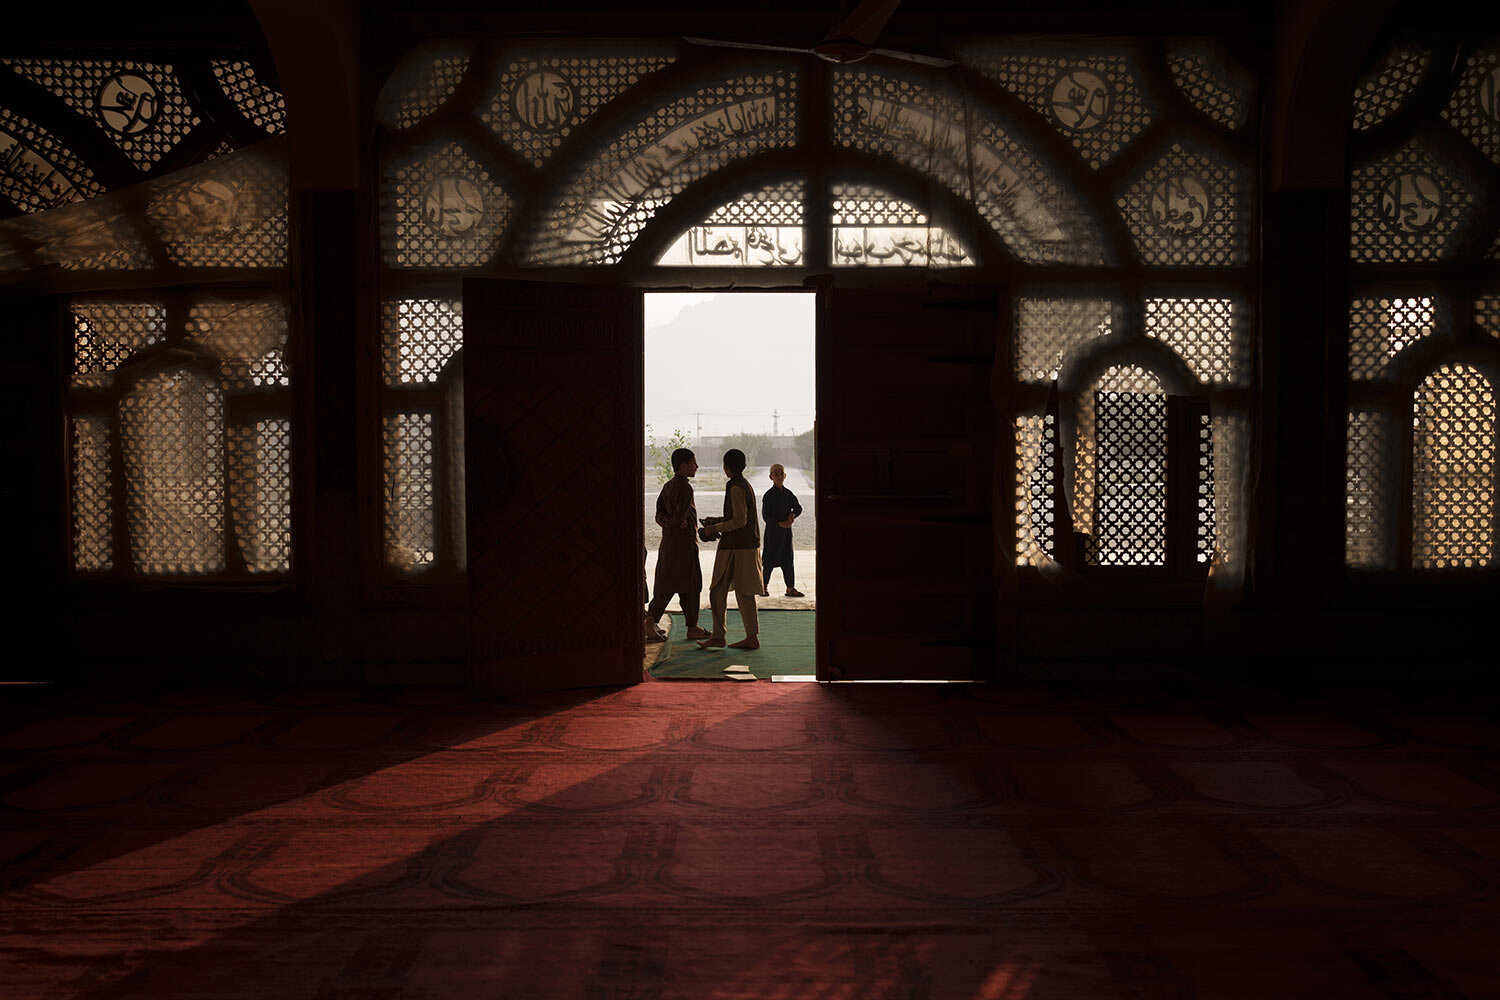 Afghan students walk out of the mosque at the Khatamul Anbiya madrasa after morning prayers in Kabul, Afghanistan, Wednesday, Sept. 29, 2021. (AP Photo/Felipe Dana)